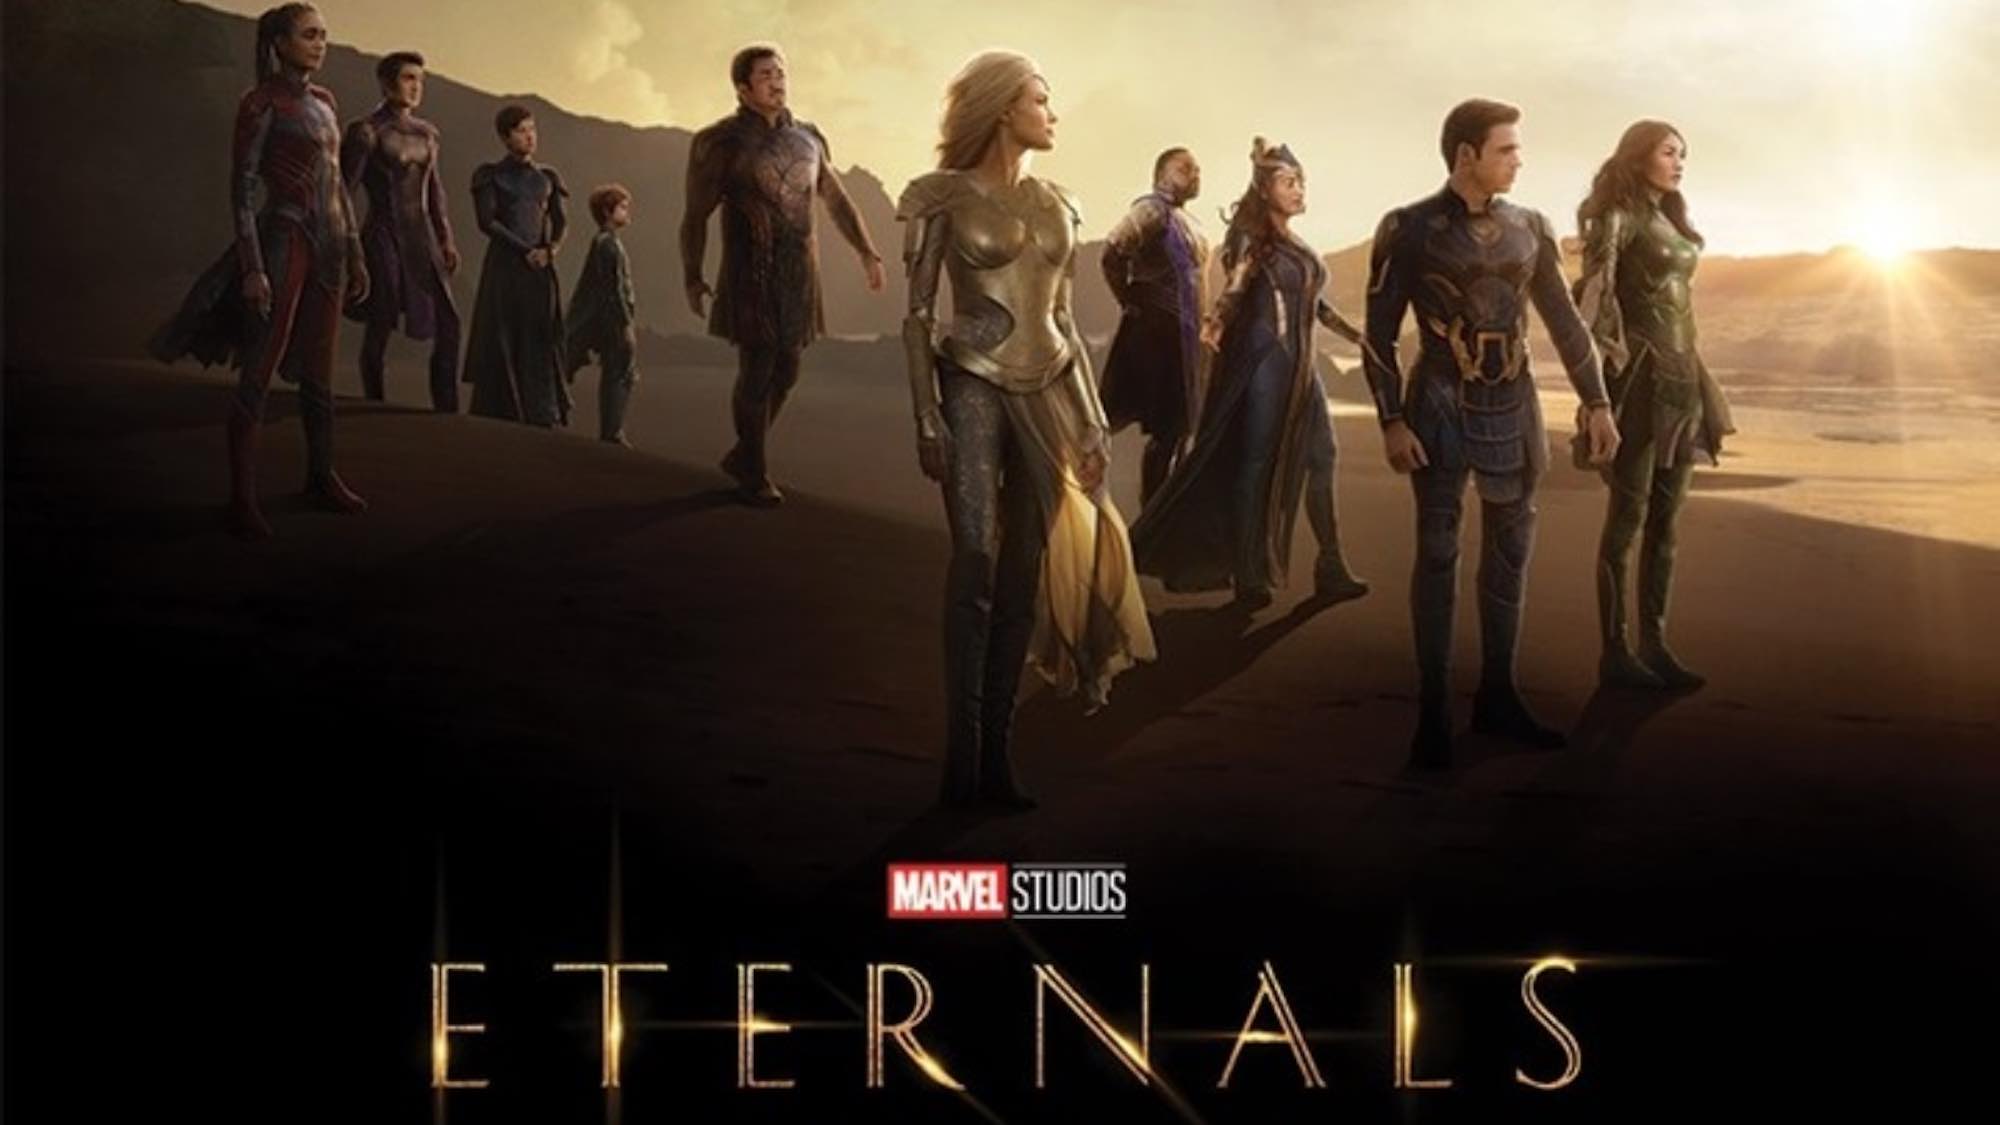 How to stream ‘Eternals’ and watch online for free on Anywhere